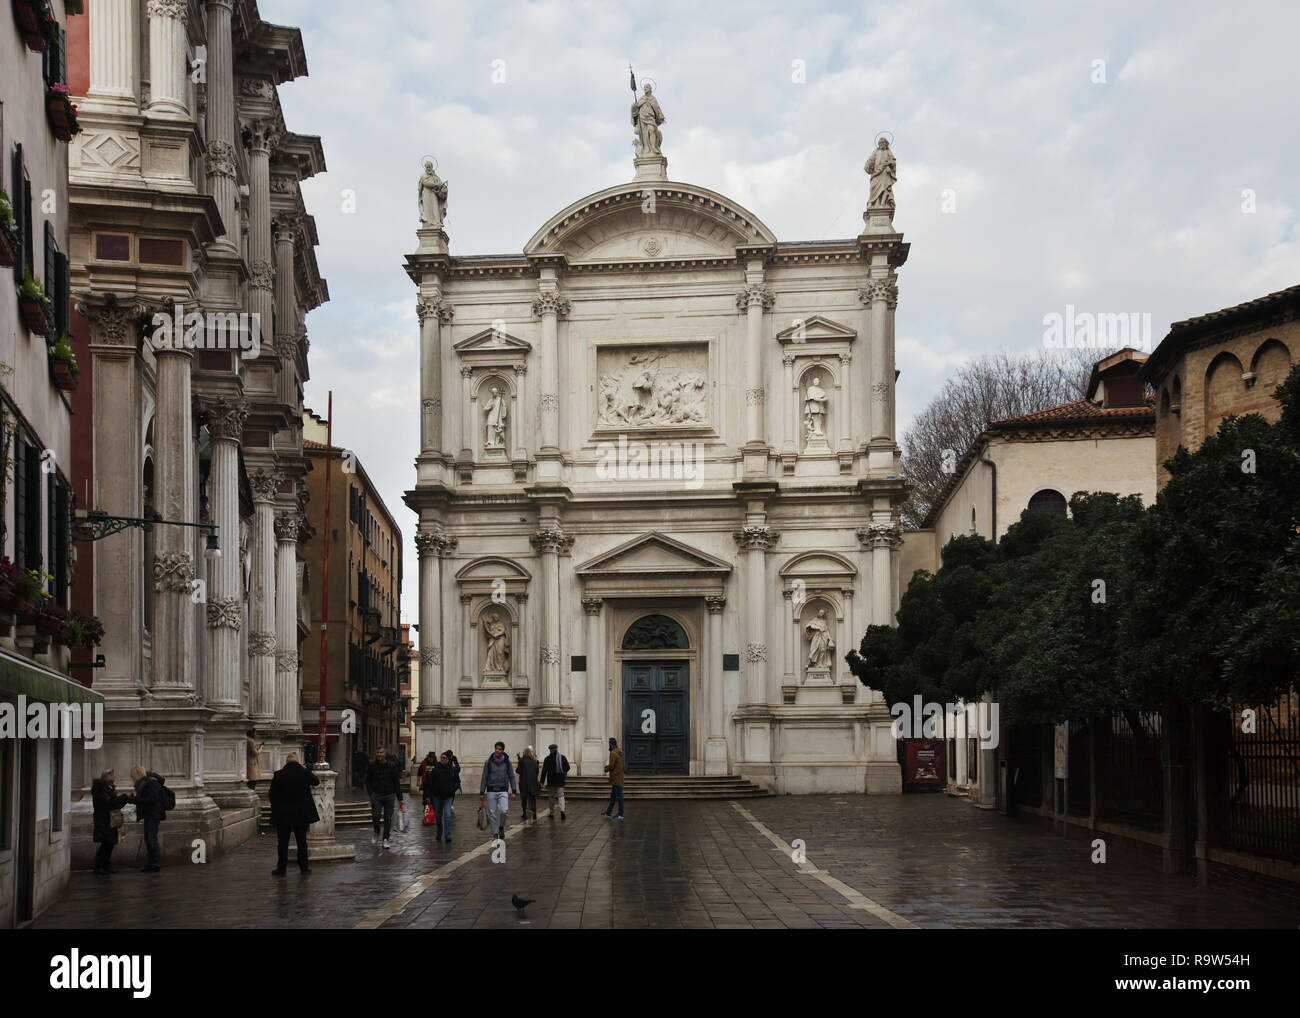 Church of Saint Roch (Chiesa di San Rocco) with a facade designed by Italian Baroque architect Bernardino Maccarucci and built between 1765 and 1771 in Venice, Italy. The building of Scuola Grande di San Rocco is seen at the left. Stock Photo